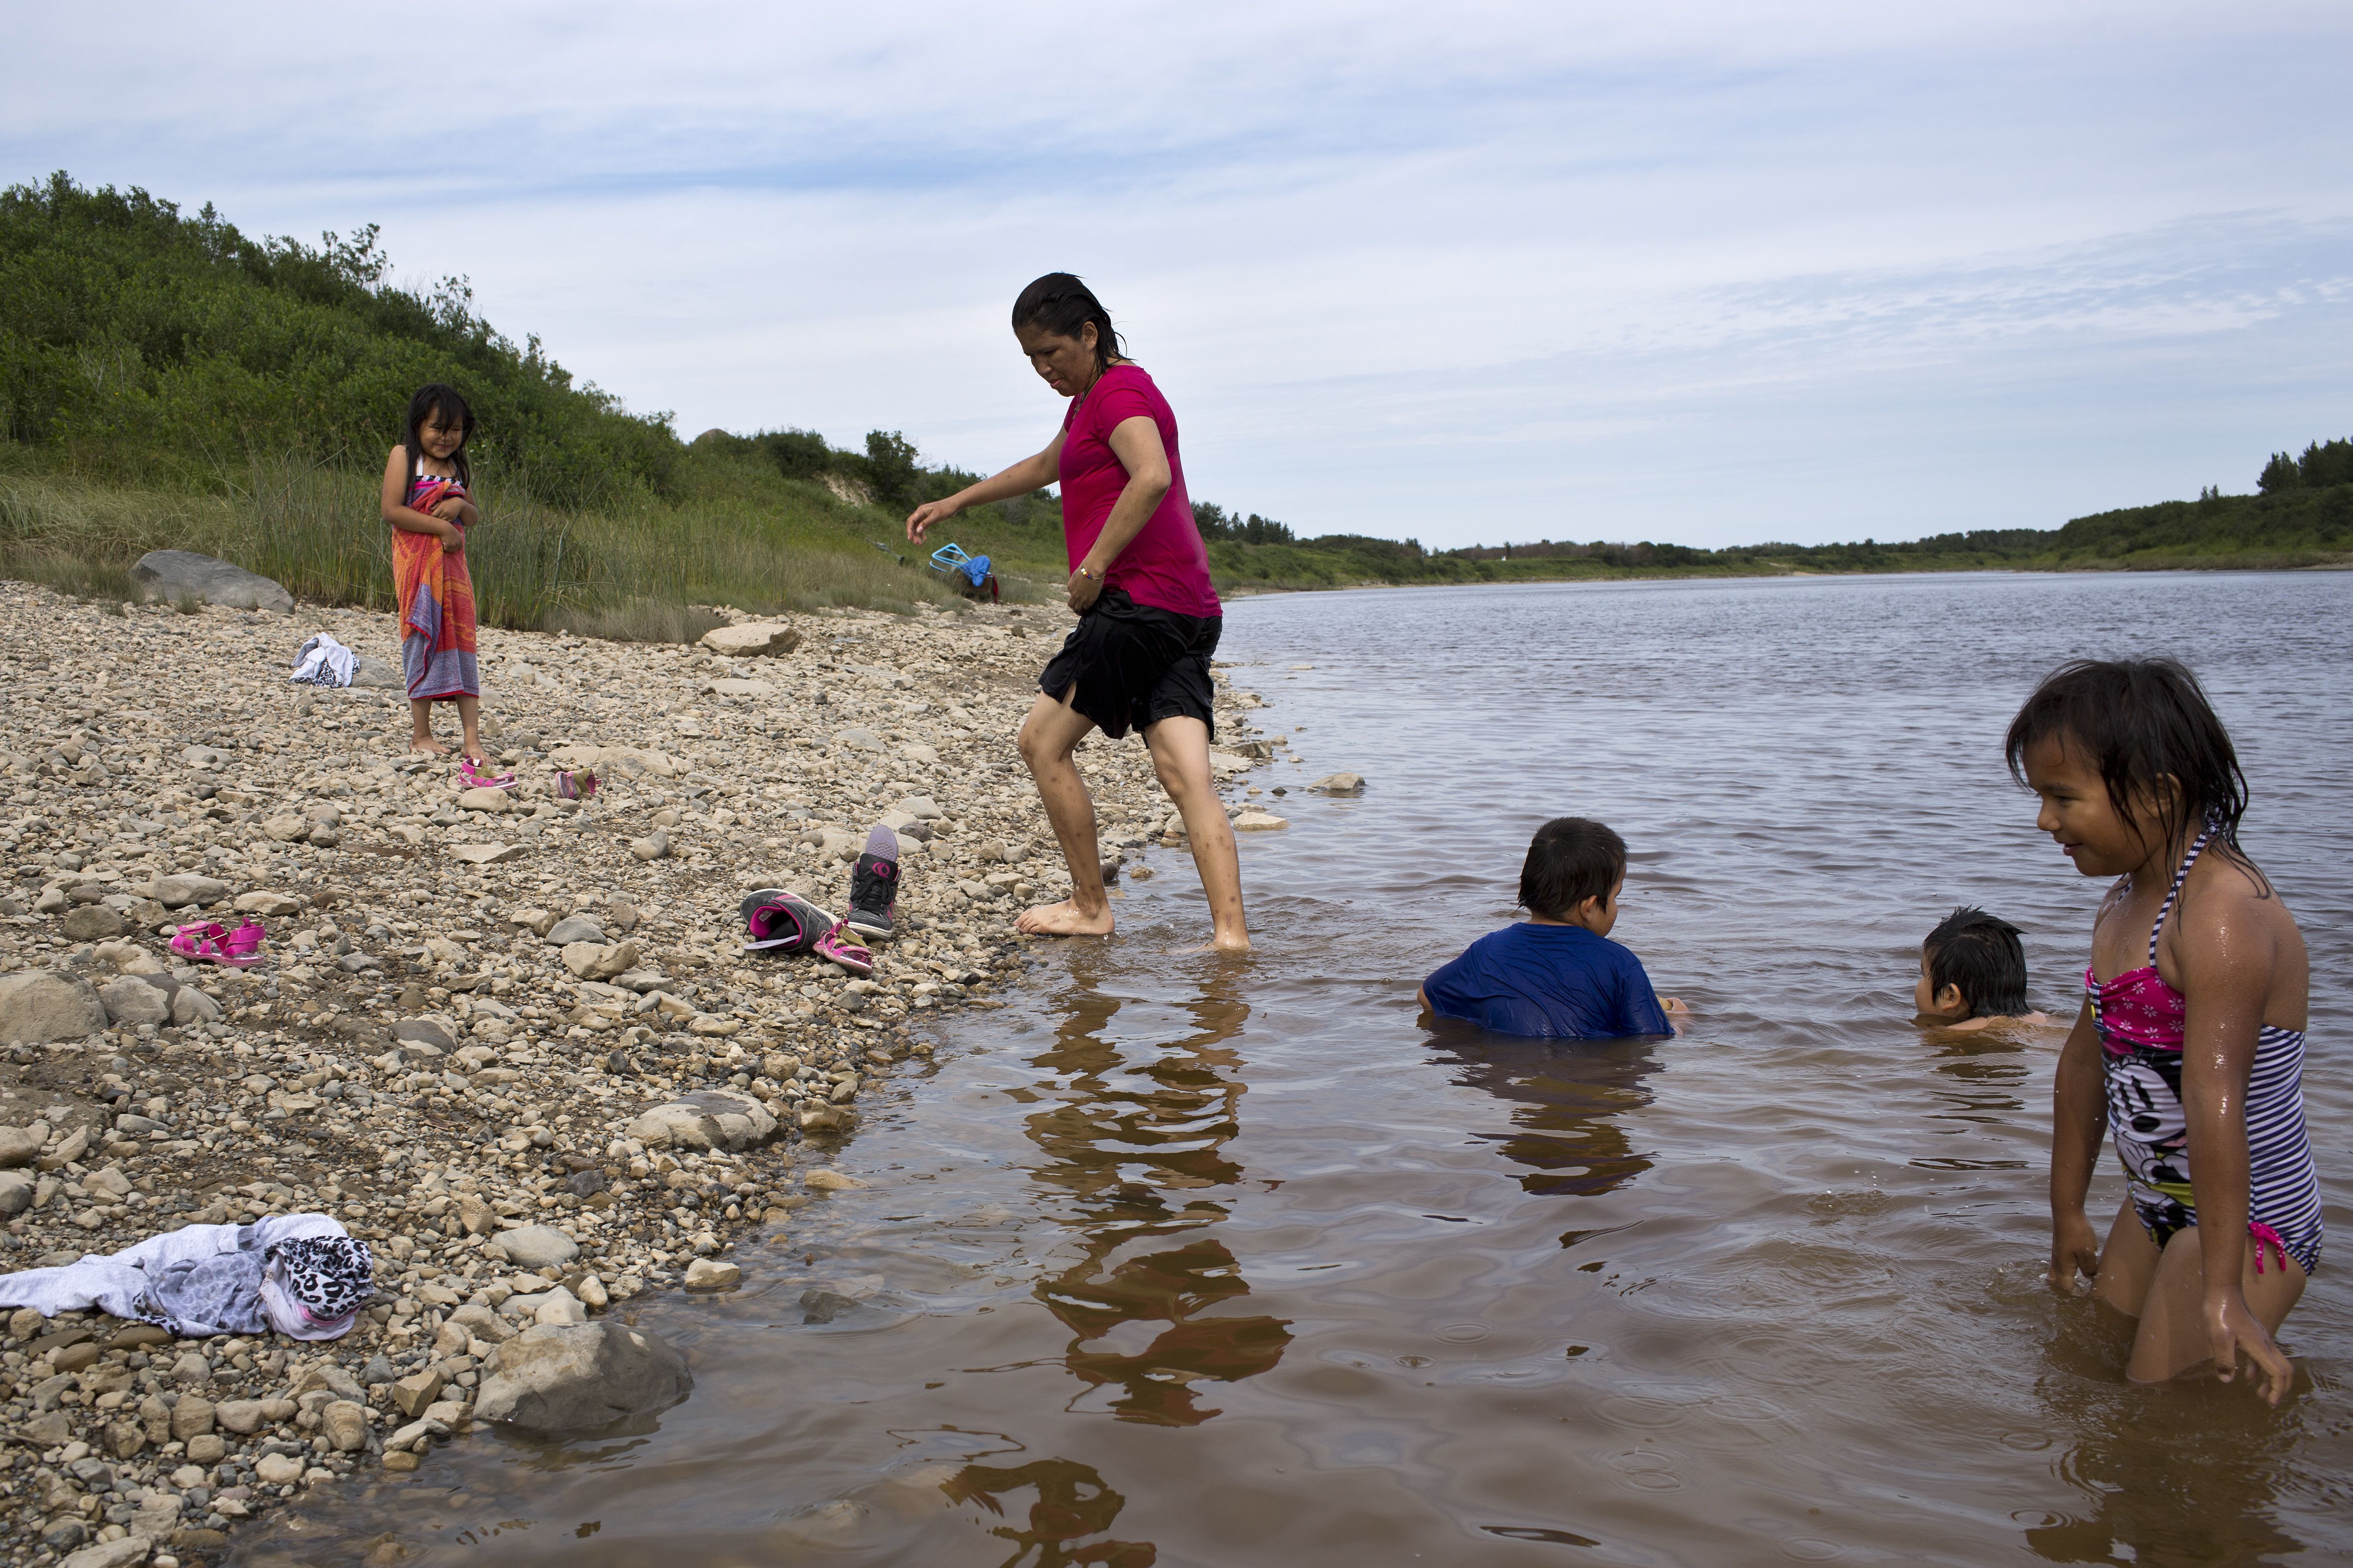 Twenty-seven-year-old Samantha Iahtail (centre, in red) swims with her nieces and nephews on the banks of the Attawpiskat river. Samantha tries to help her sister with the kids when she can and while her life has been filled with challenges of her own, she believes that "the creator doesn’t give you things you can’t handle”. In Attawapiskat many families face great difficulties yet respond with resilience, relying on each other to navigate the struggles associated with being First Nations people. Image by David Maurice Smith. Canada, 2016.